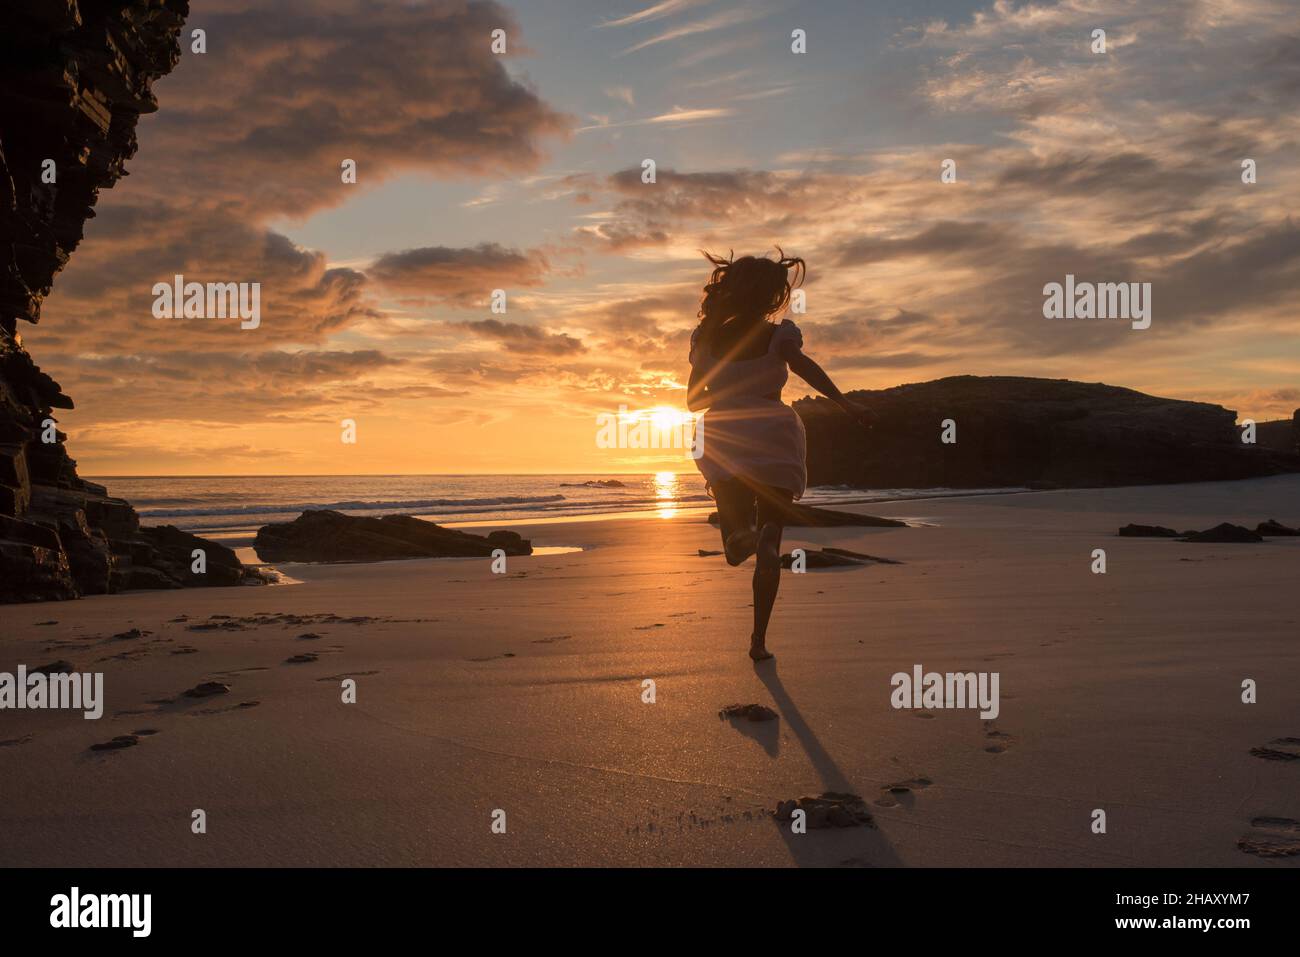 Silhouette of anonymous female in dress jogging on sandy beach of Cathedrals near calm sea and enjoying sunset cloudy sky Stock Photo